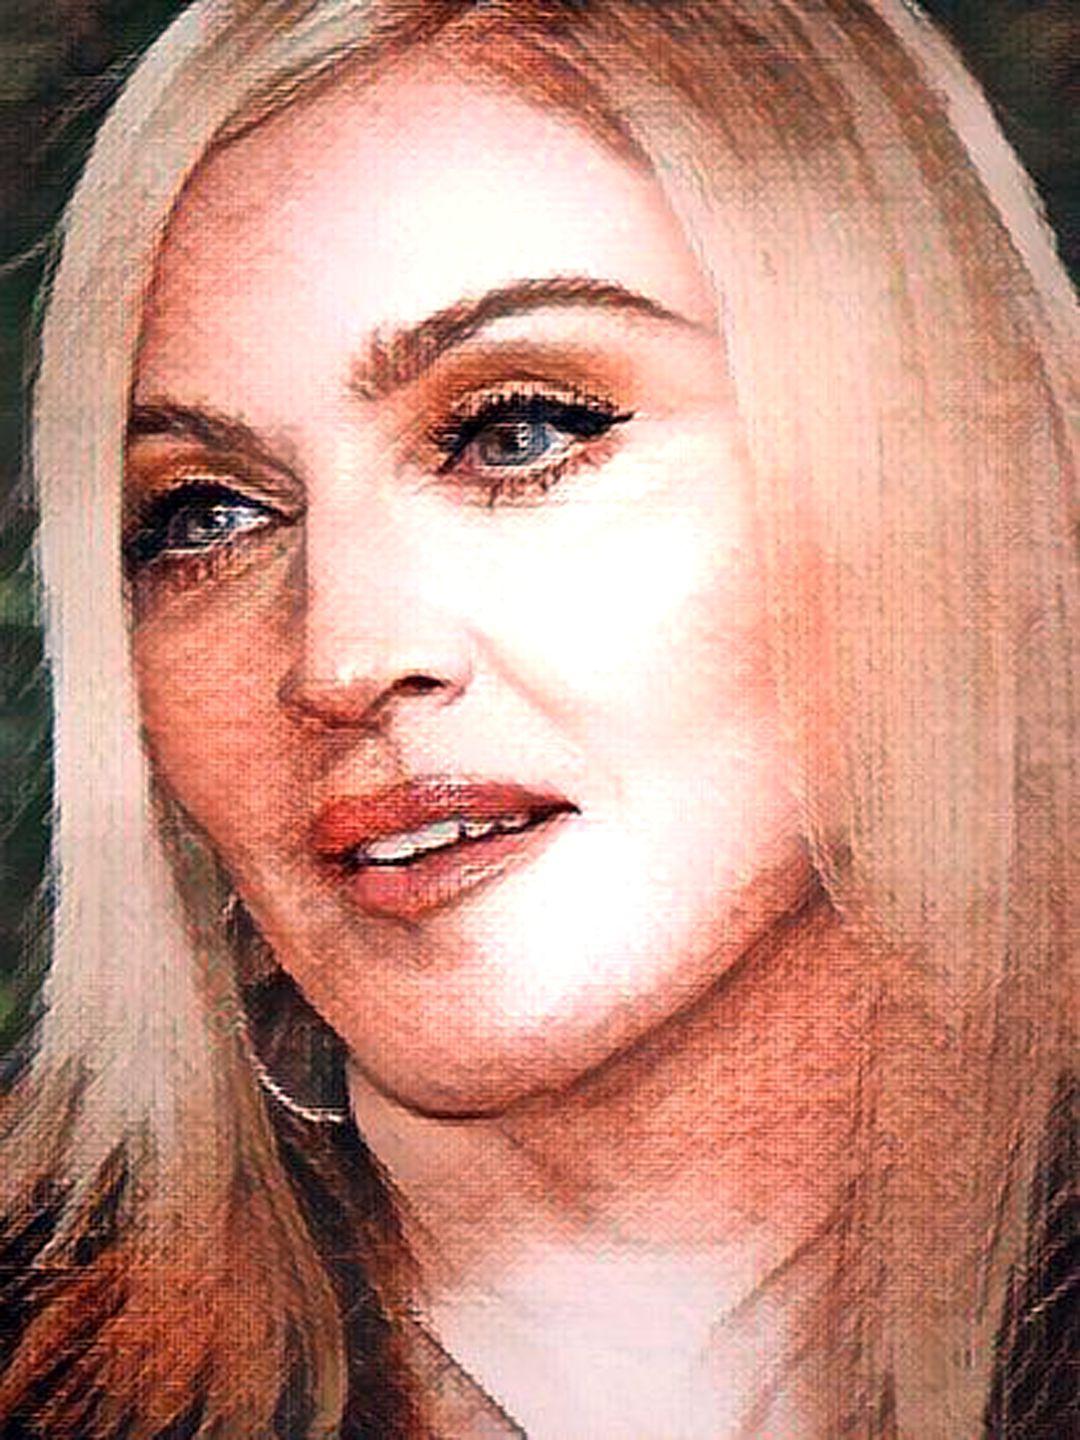 Meet Madden Hard Core - Madonna # 36 - Celeb ART - Beautiful Artworks of Celebrities, Footballers,  Politicians and Famous People in World | OpenSea